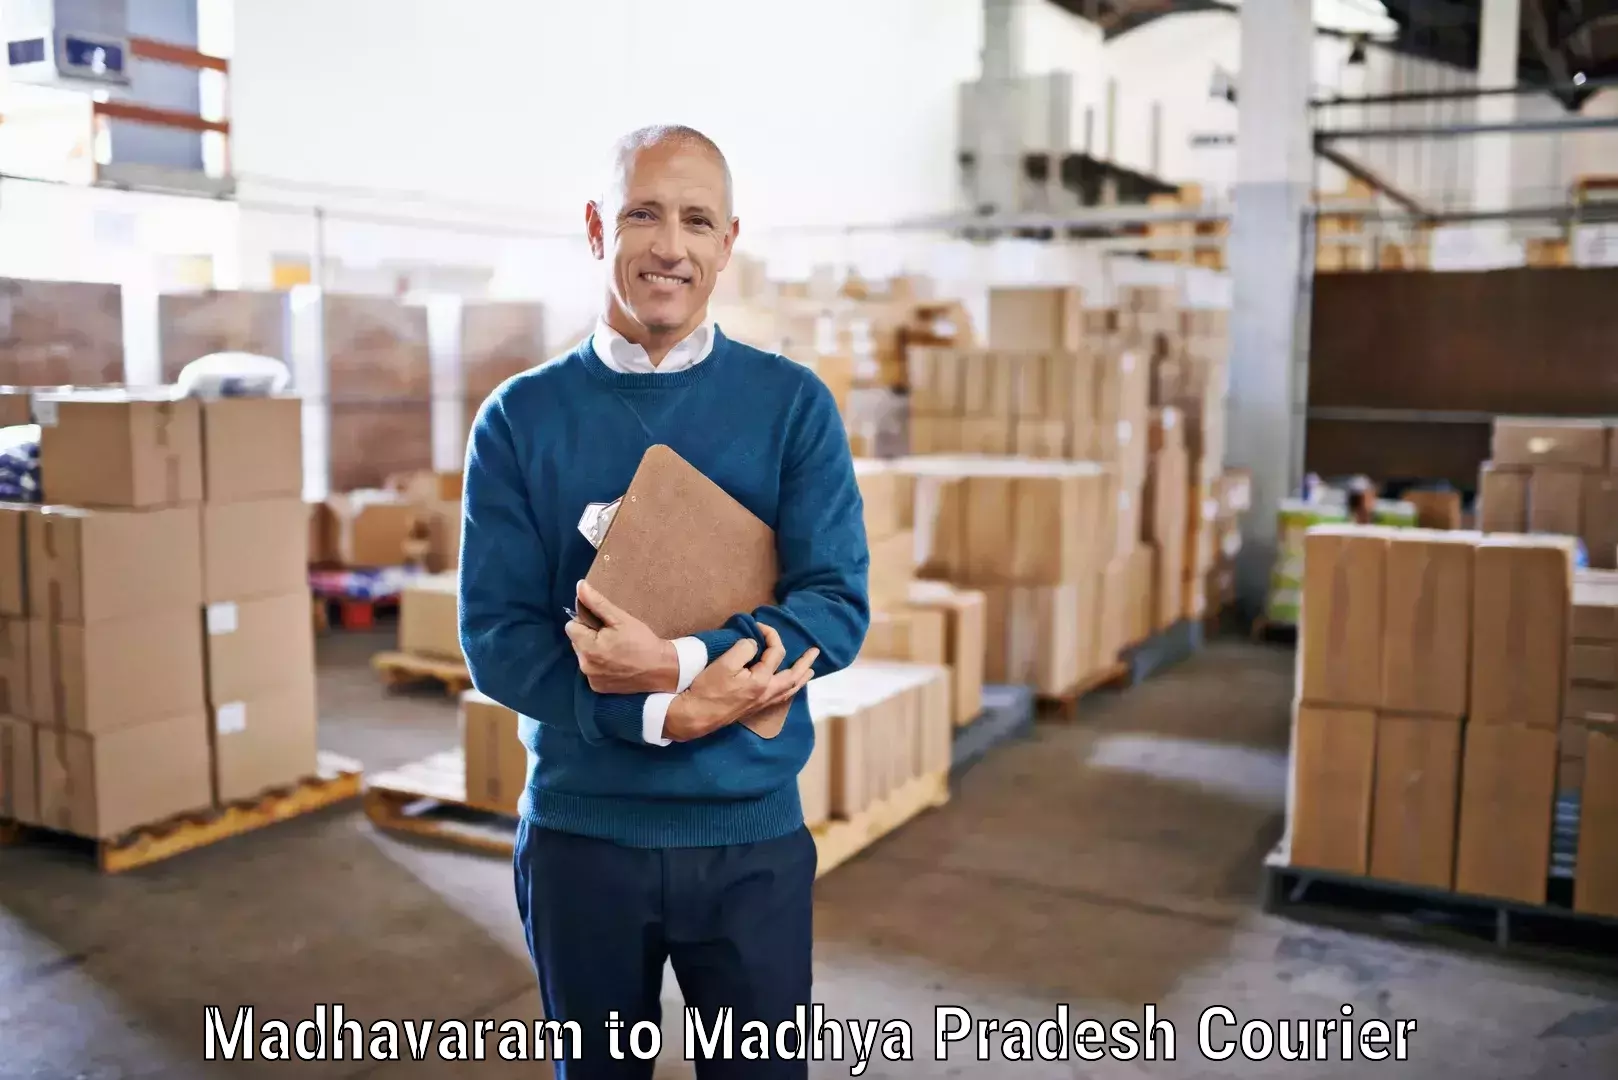 Courier service innovation Madhavaram to IIIT Bhopal